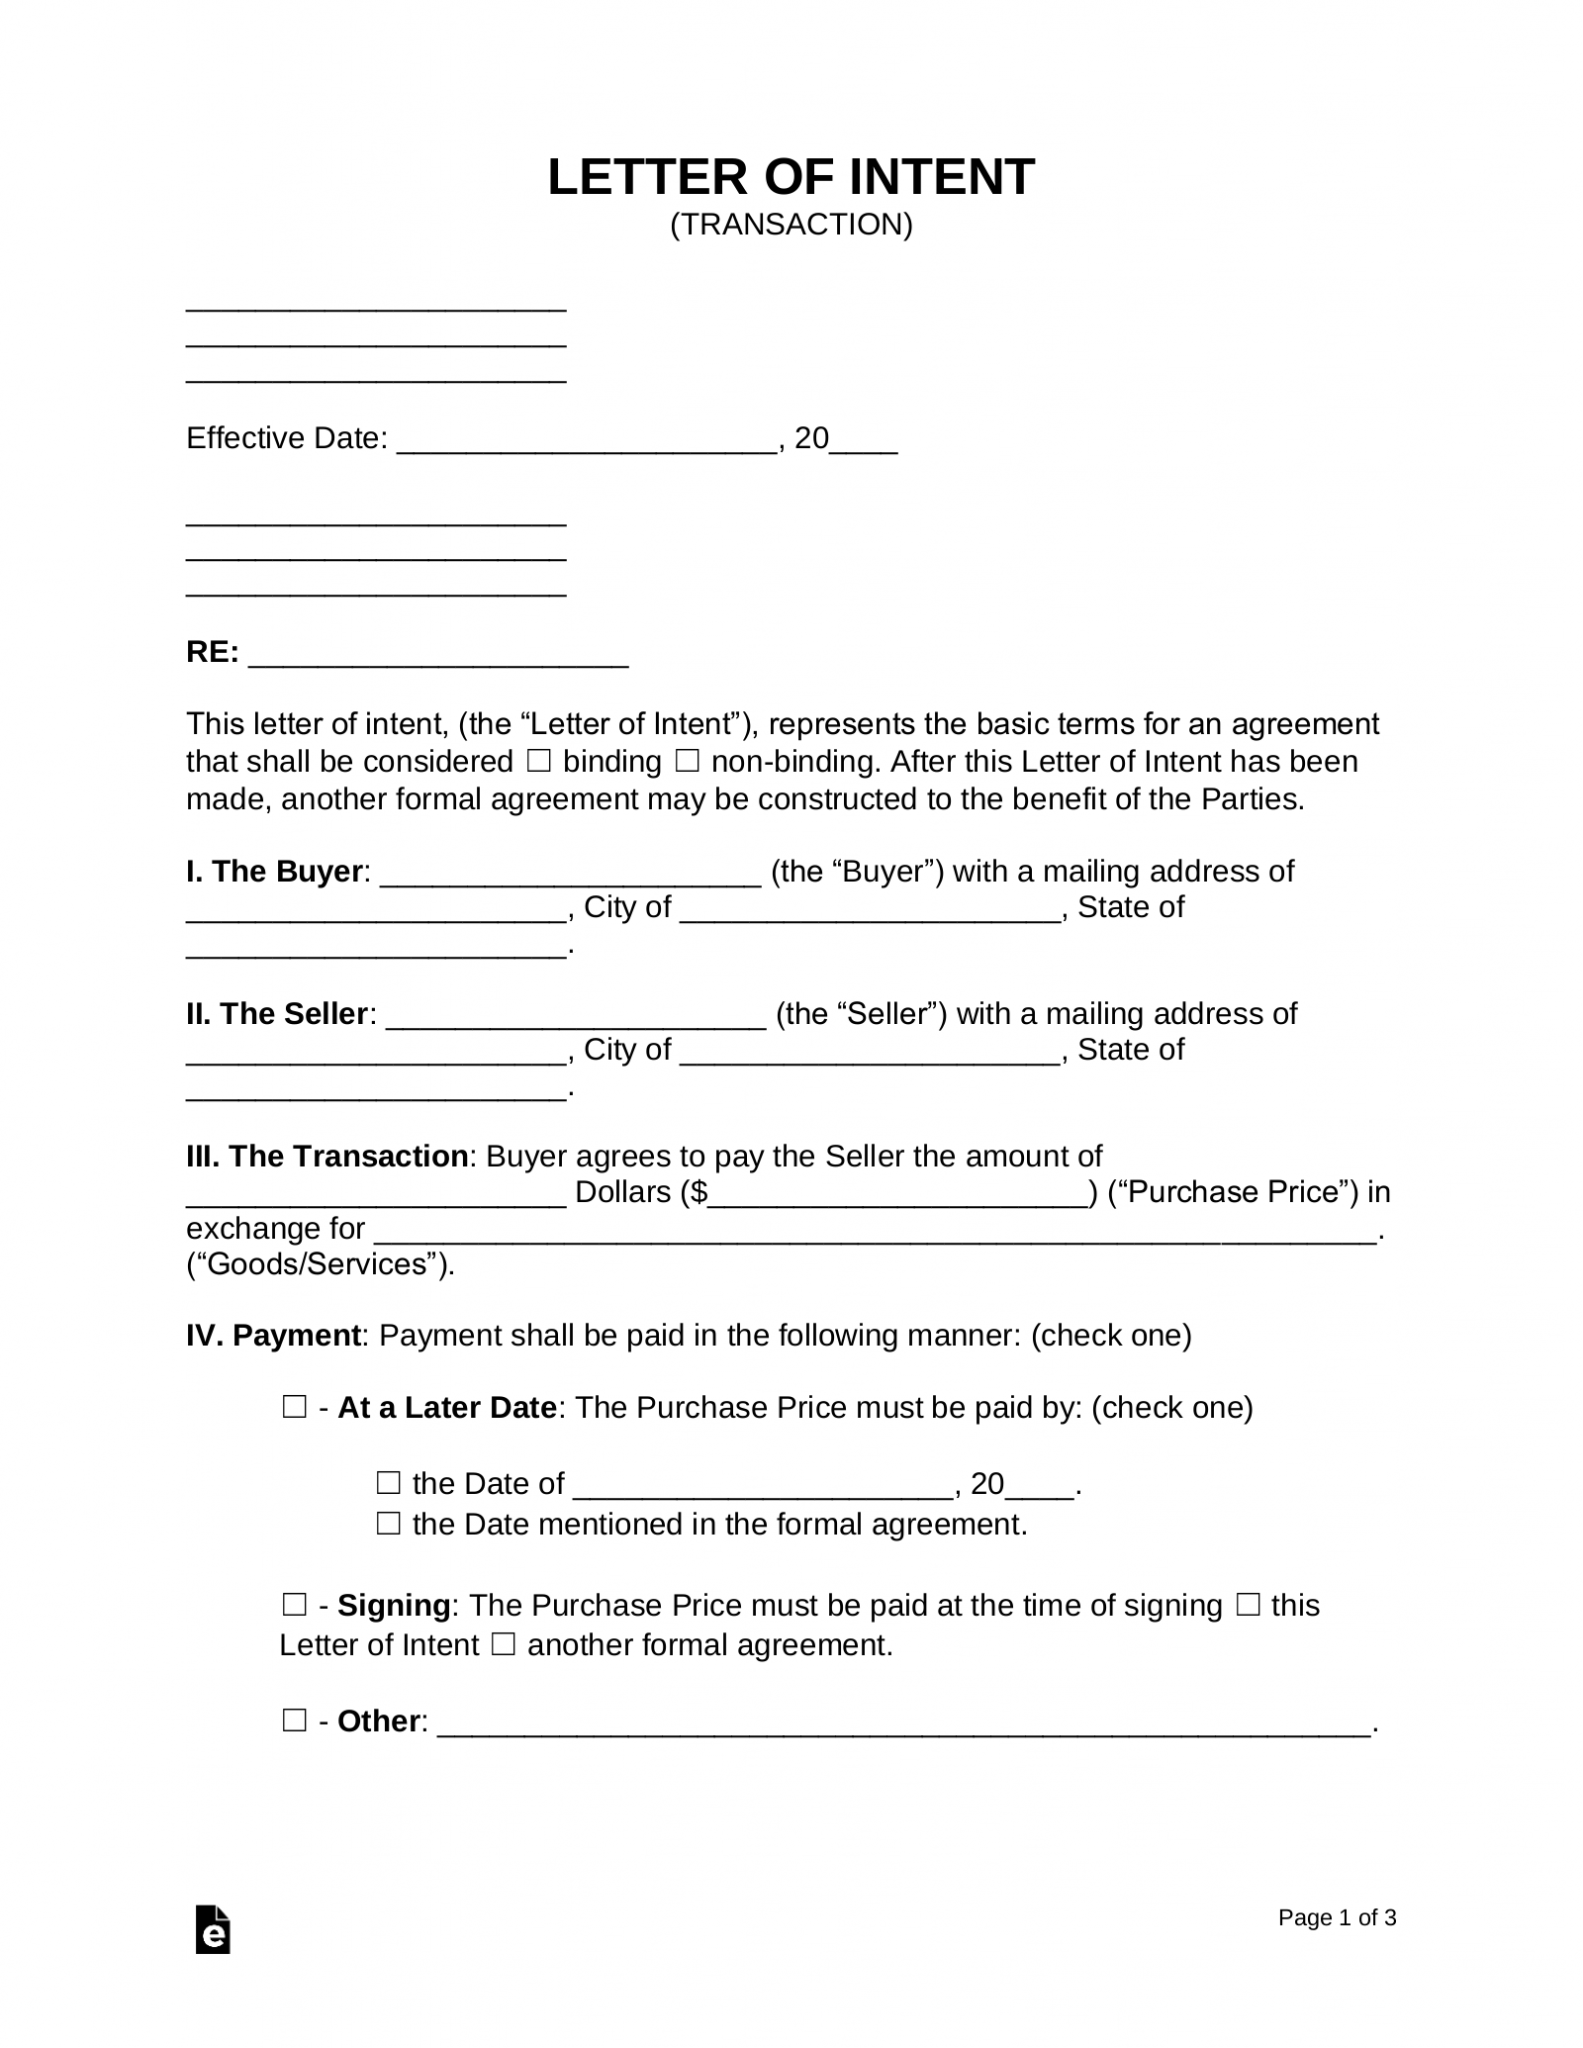 assignment of letter of intent